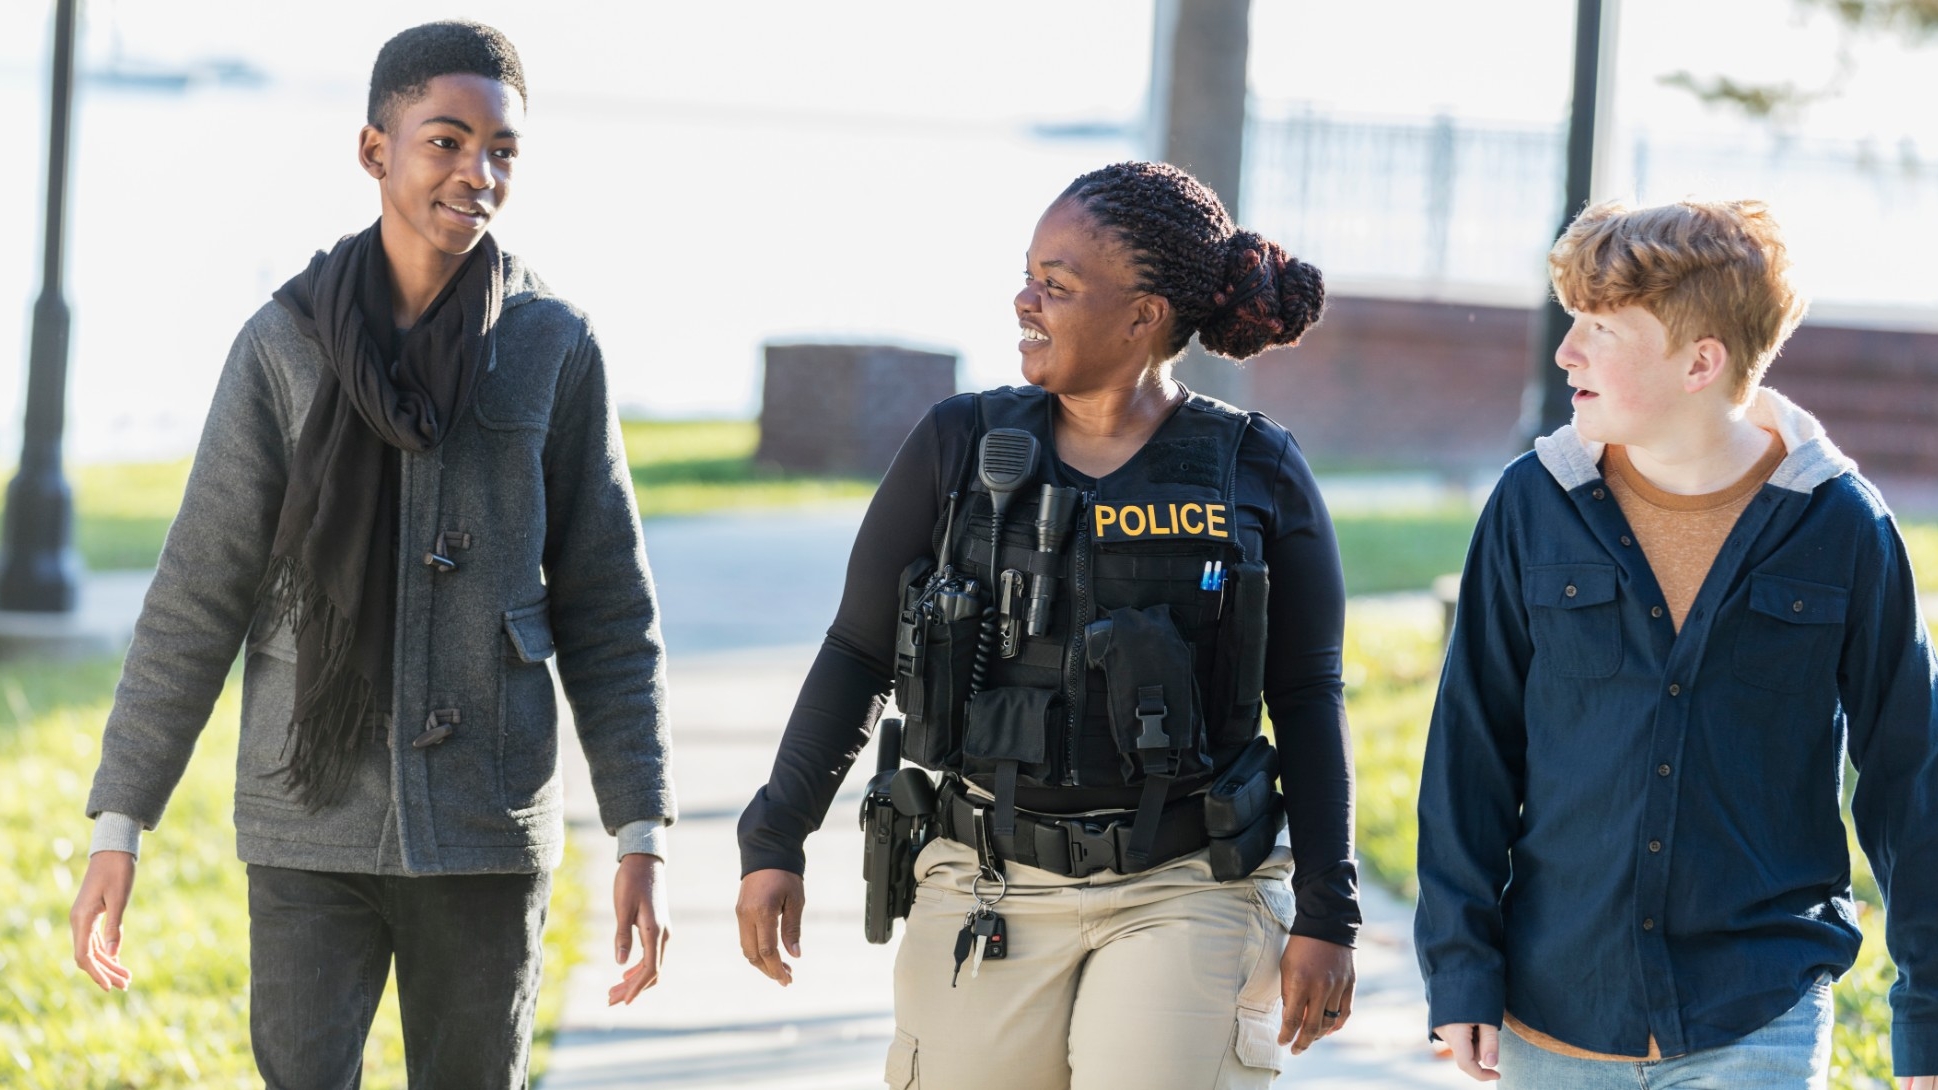 A female police officer smiles as she walks with two young teenage boys. Photo by kali9 / Getty Images